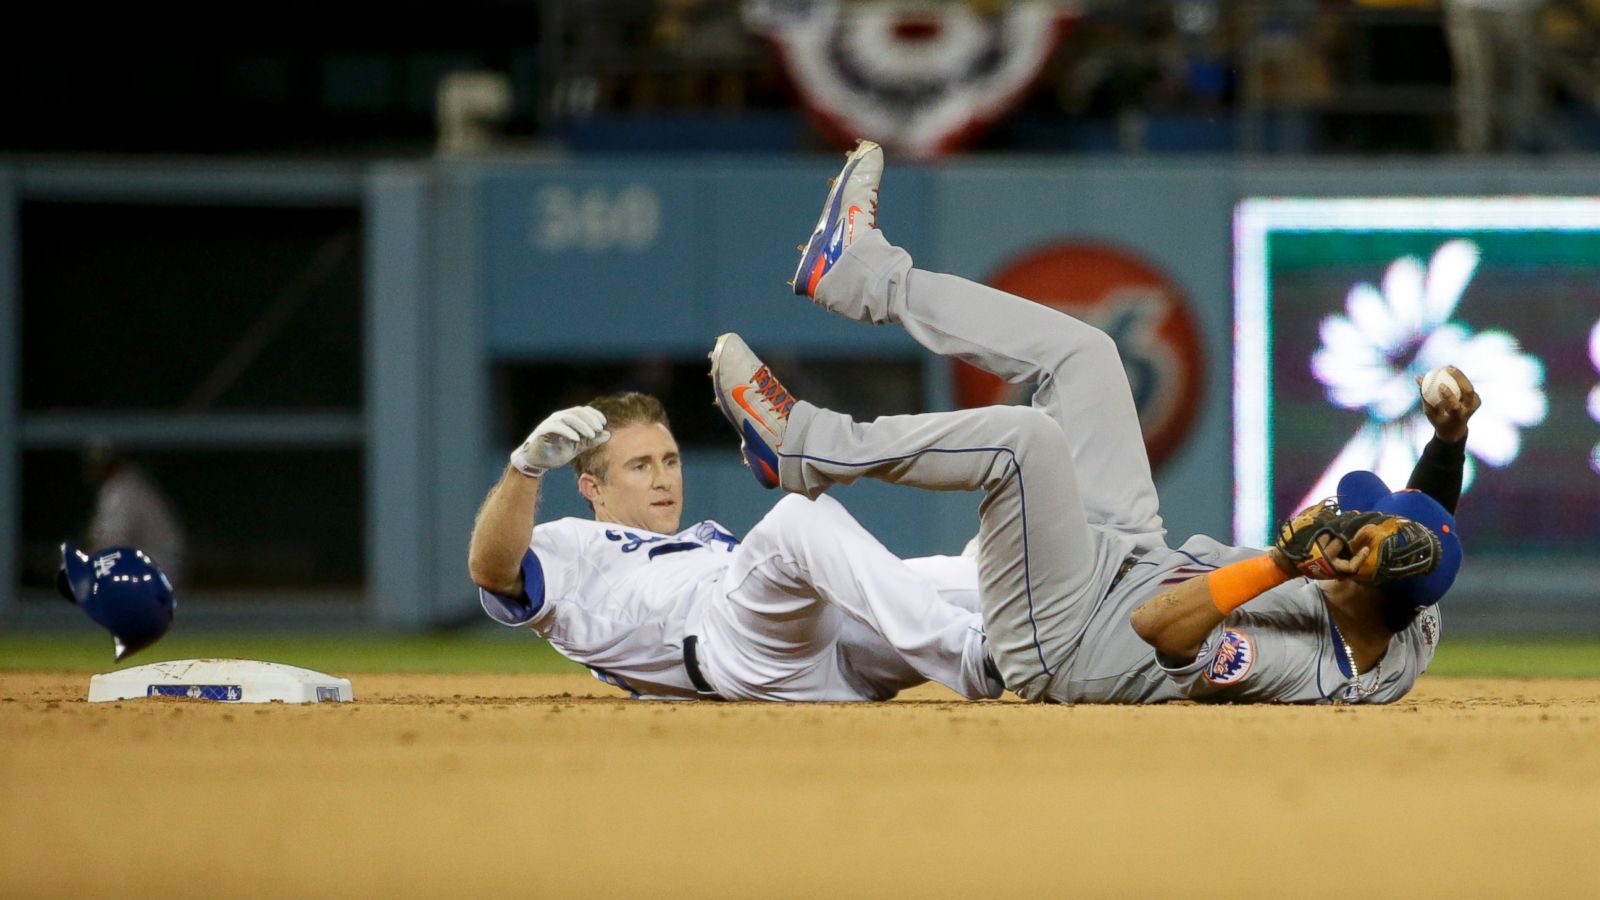 A Look at Chase Utley's Controversial Slide and Others That Came